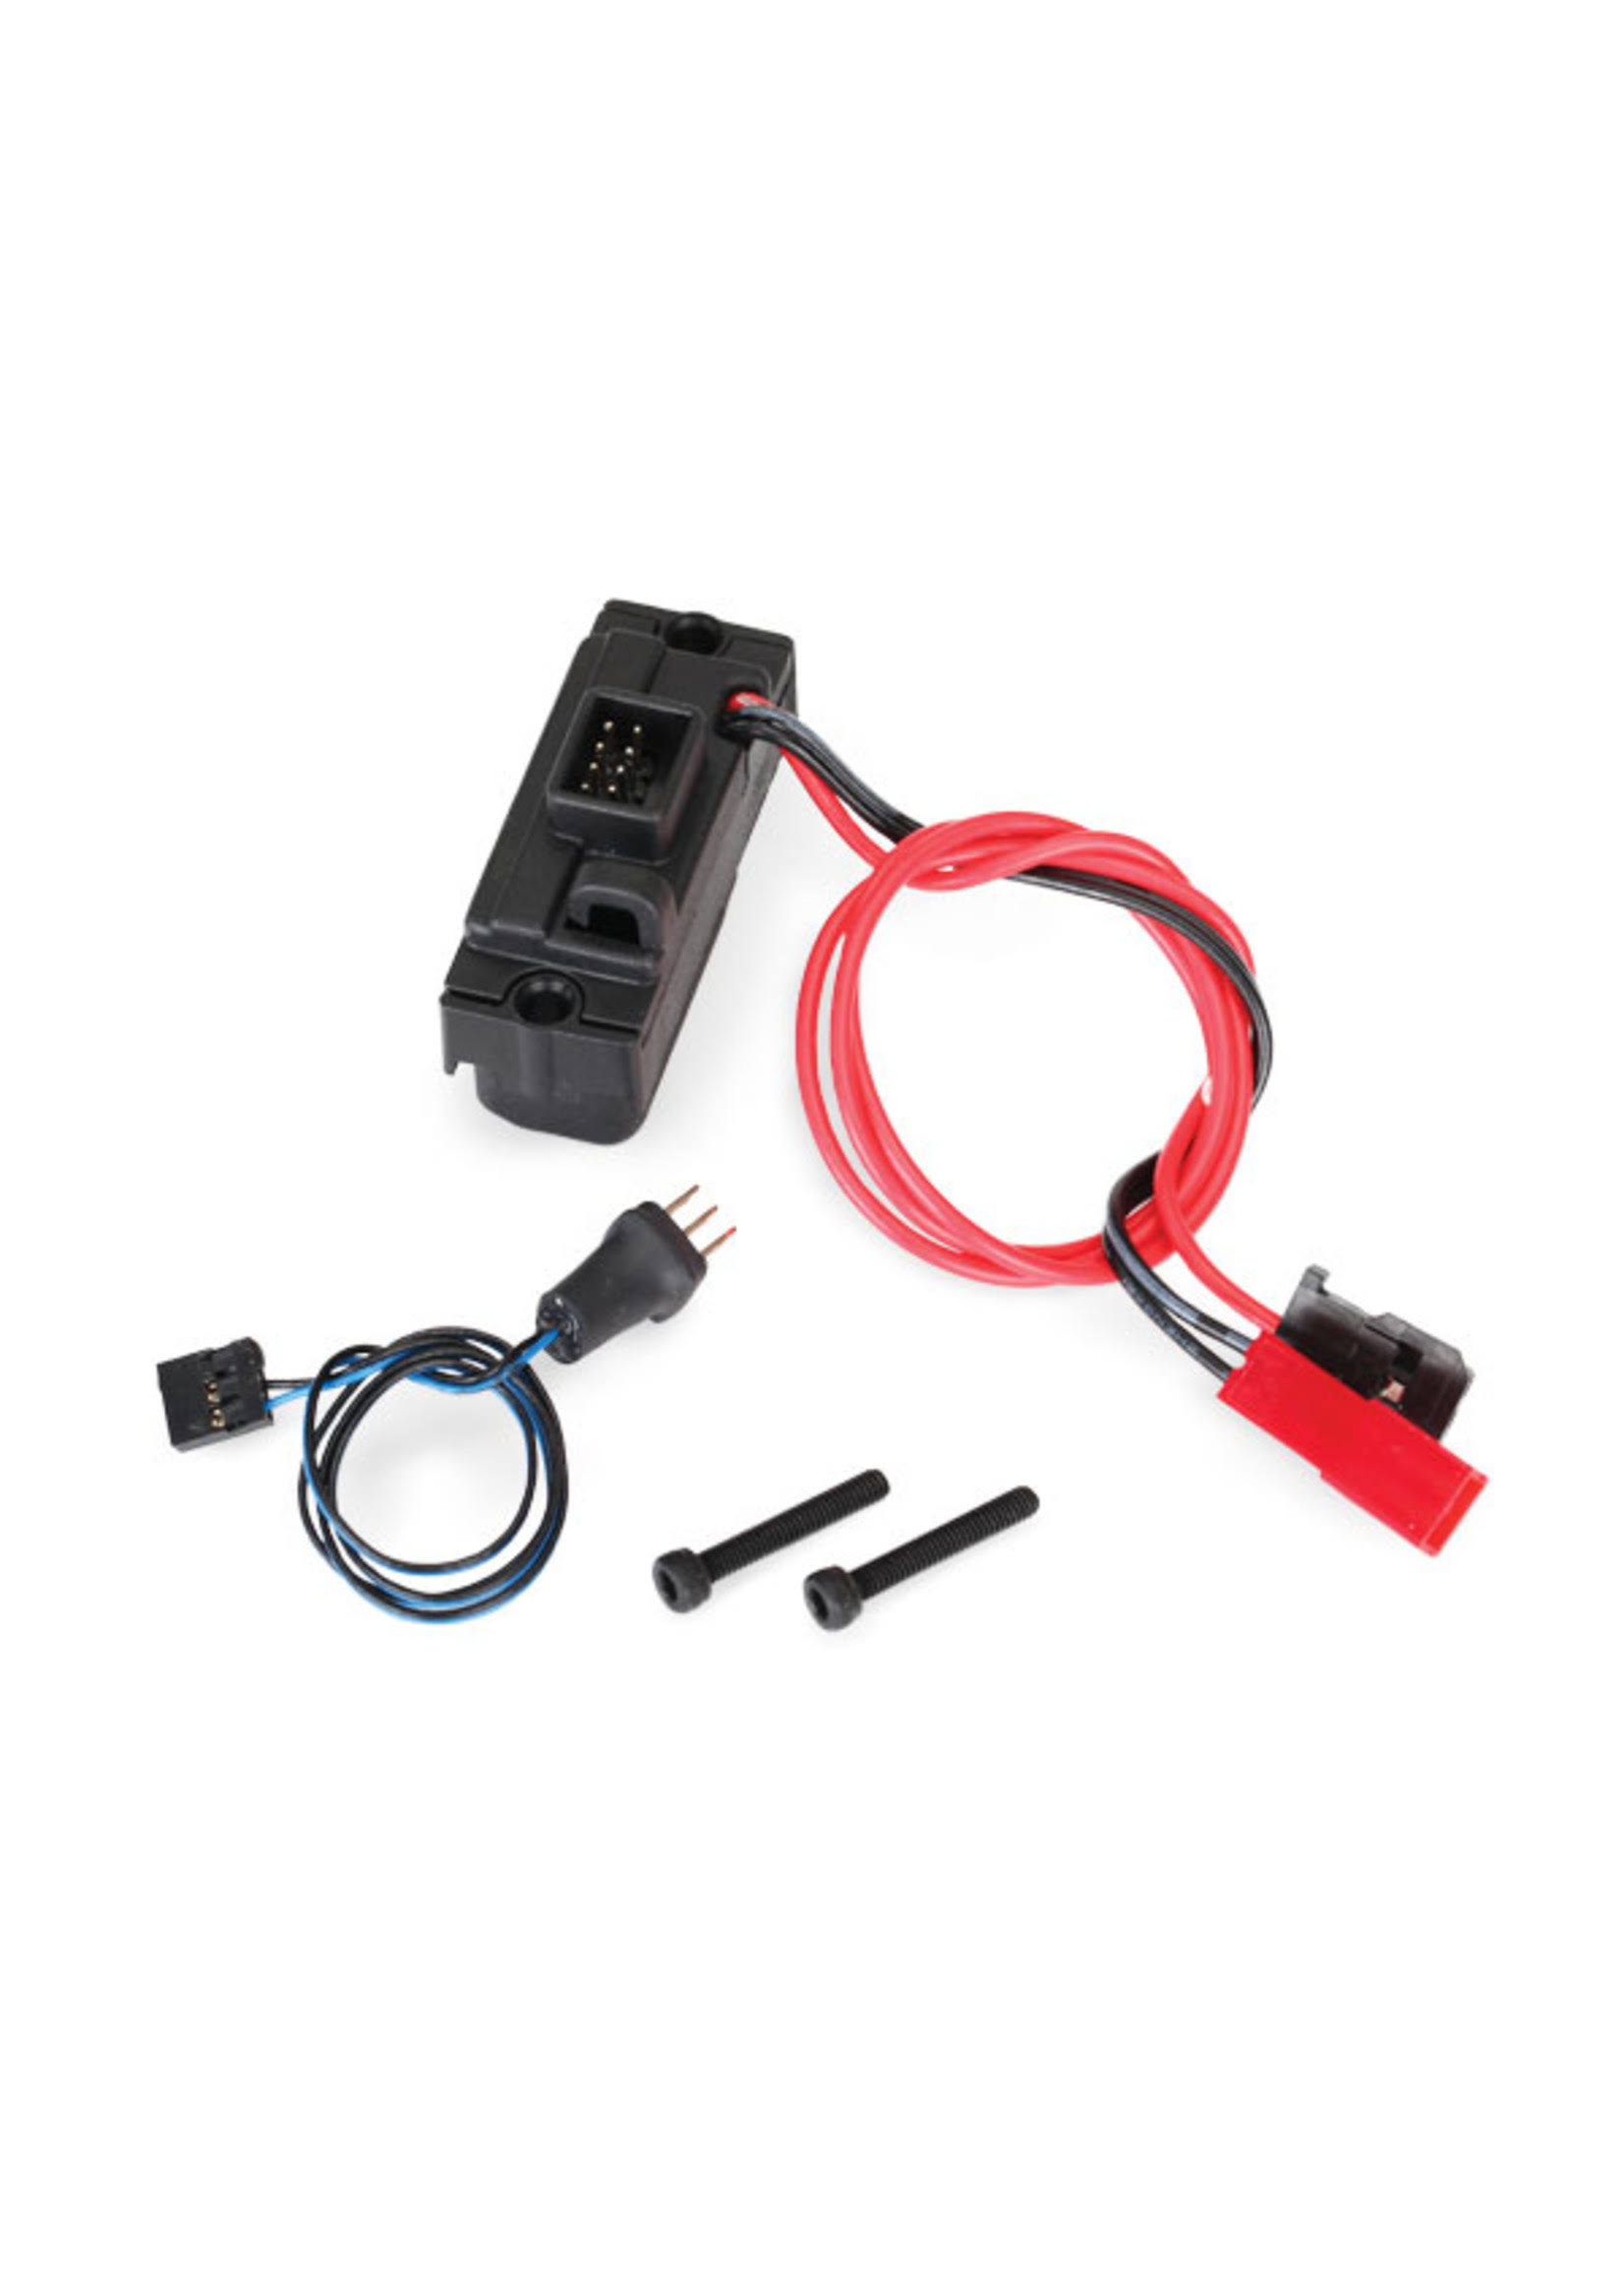 Traxxas TRX8028 LED Lights, Power Supply, TRX-4/3-IN-1 Wire Harness